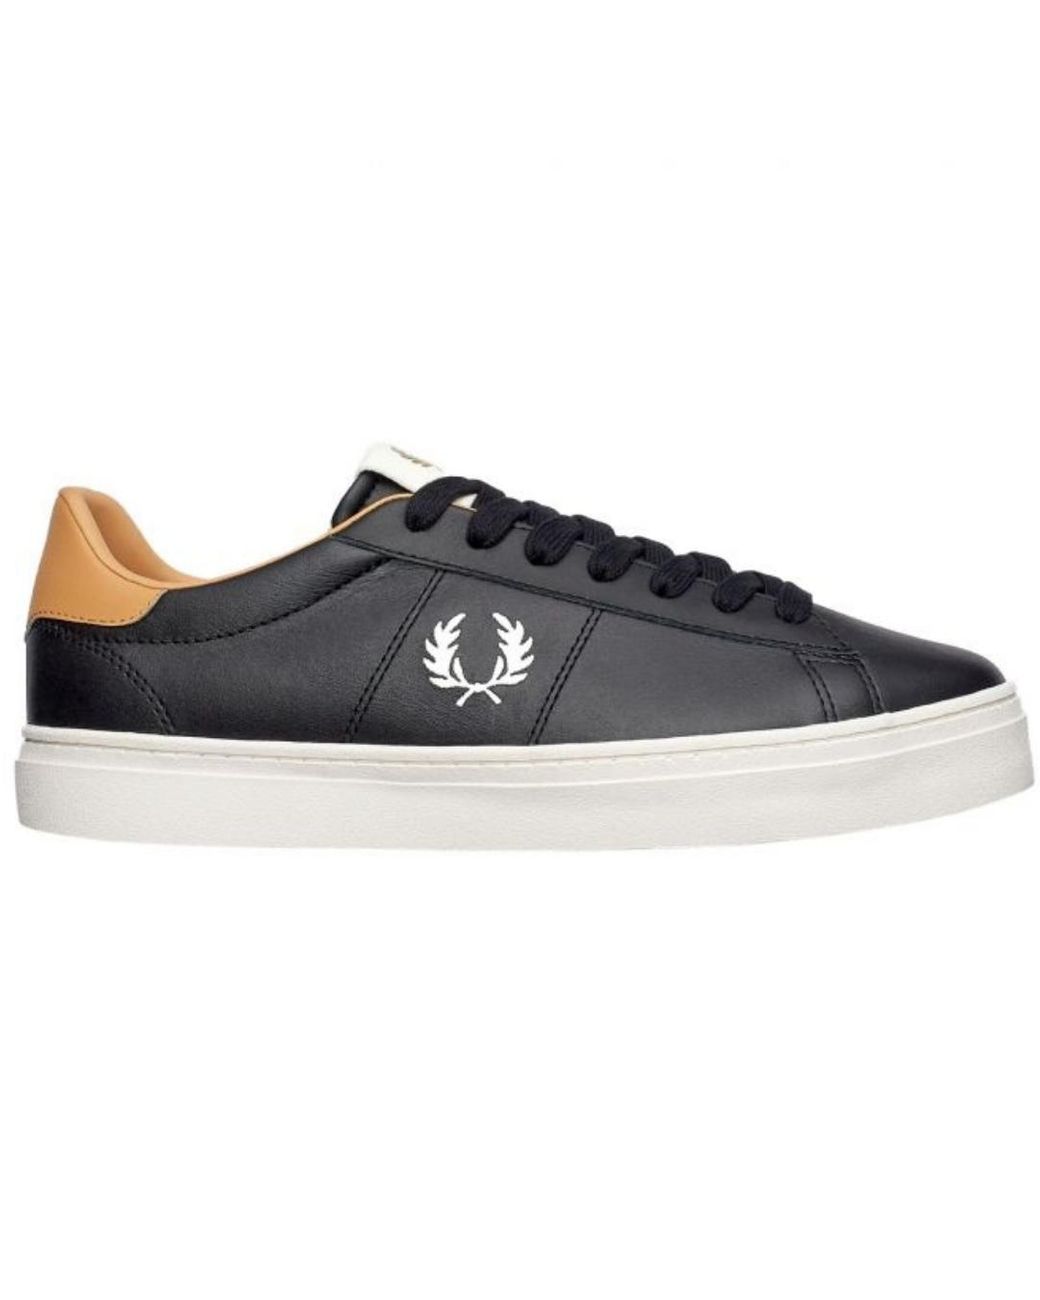 Fred Perry Spencer Vulc Leather B8350 102 Black Trainers for Men | Lyst